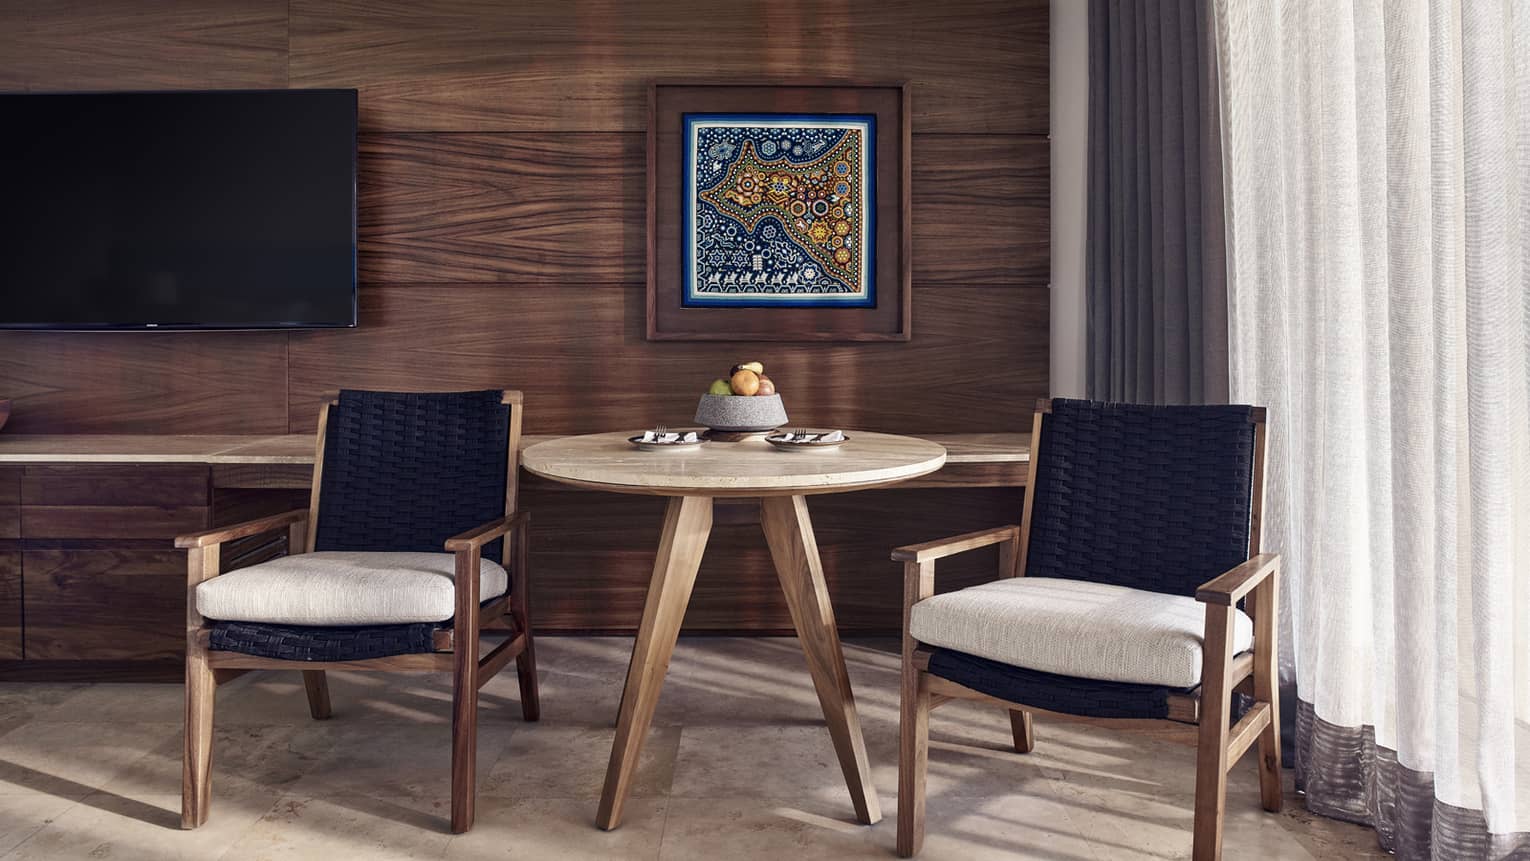 Small wooden table and two arm chairs, wooden wall and artwork